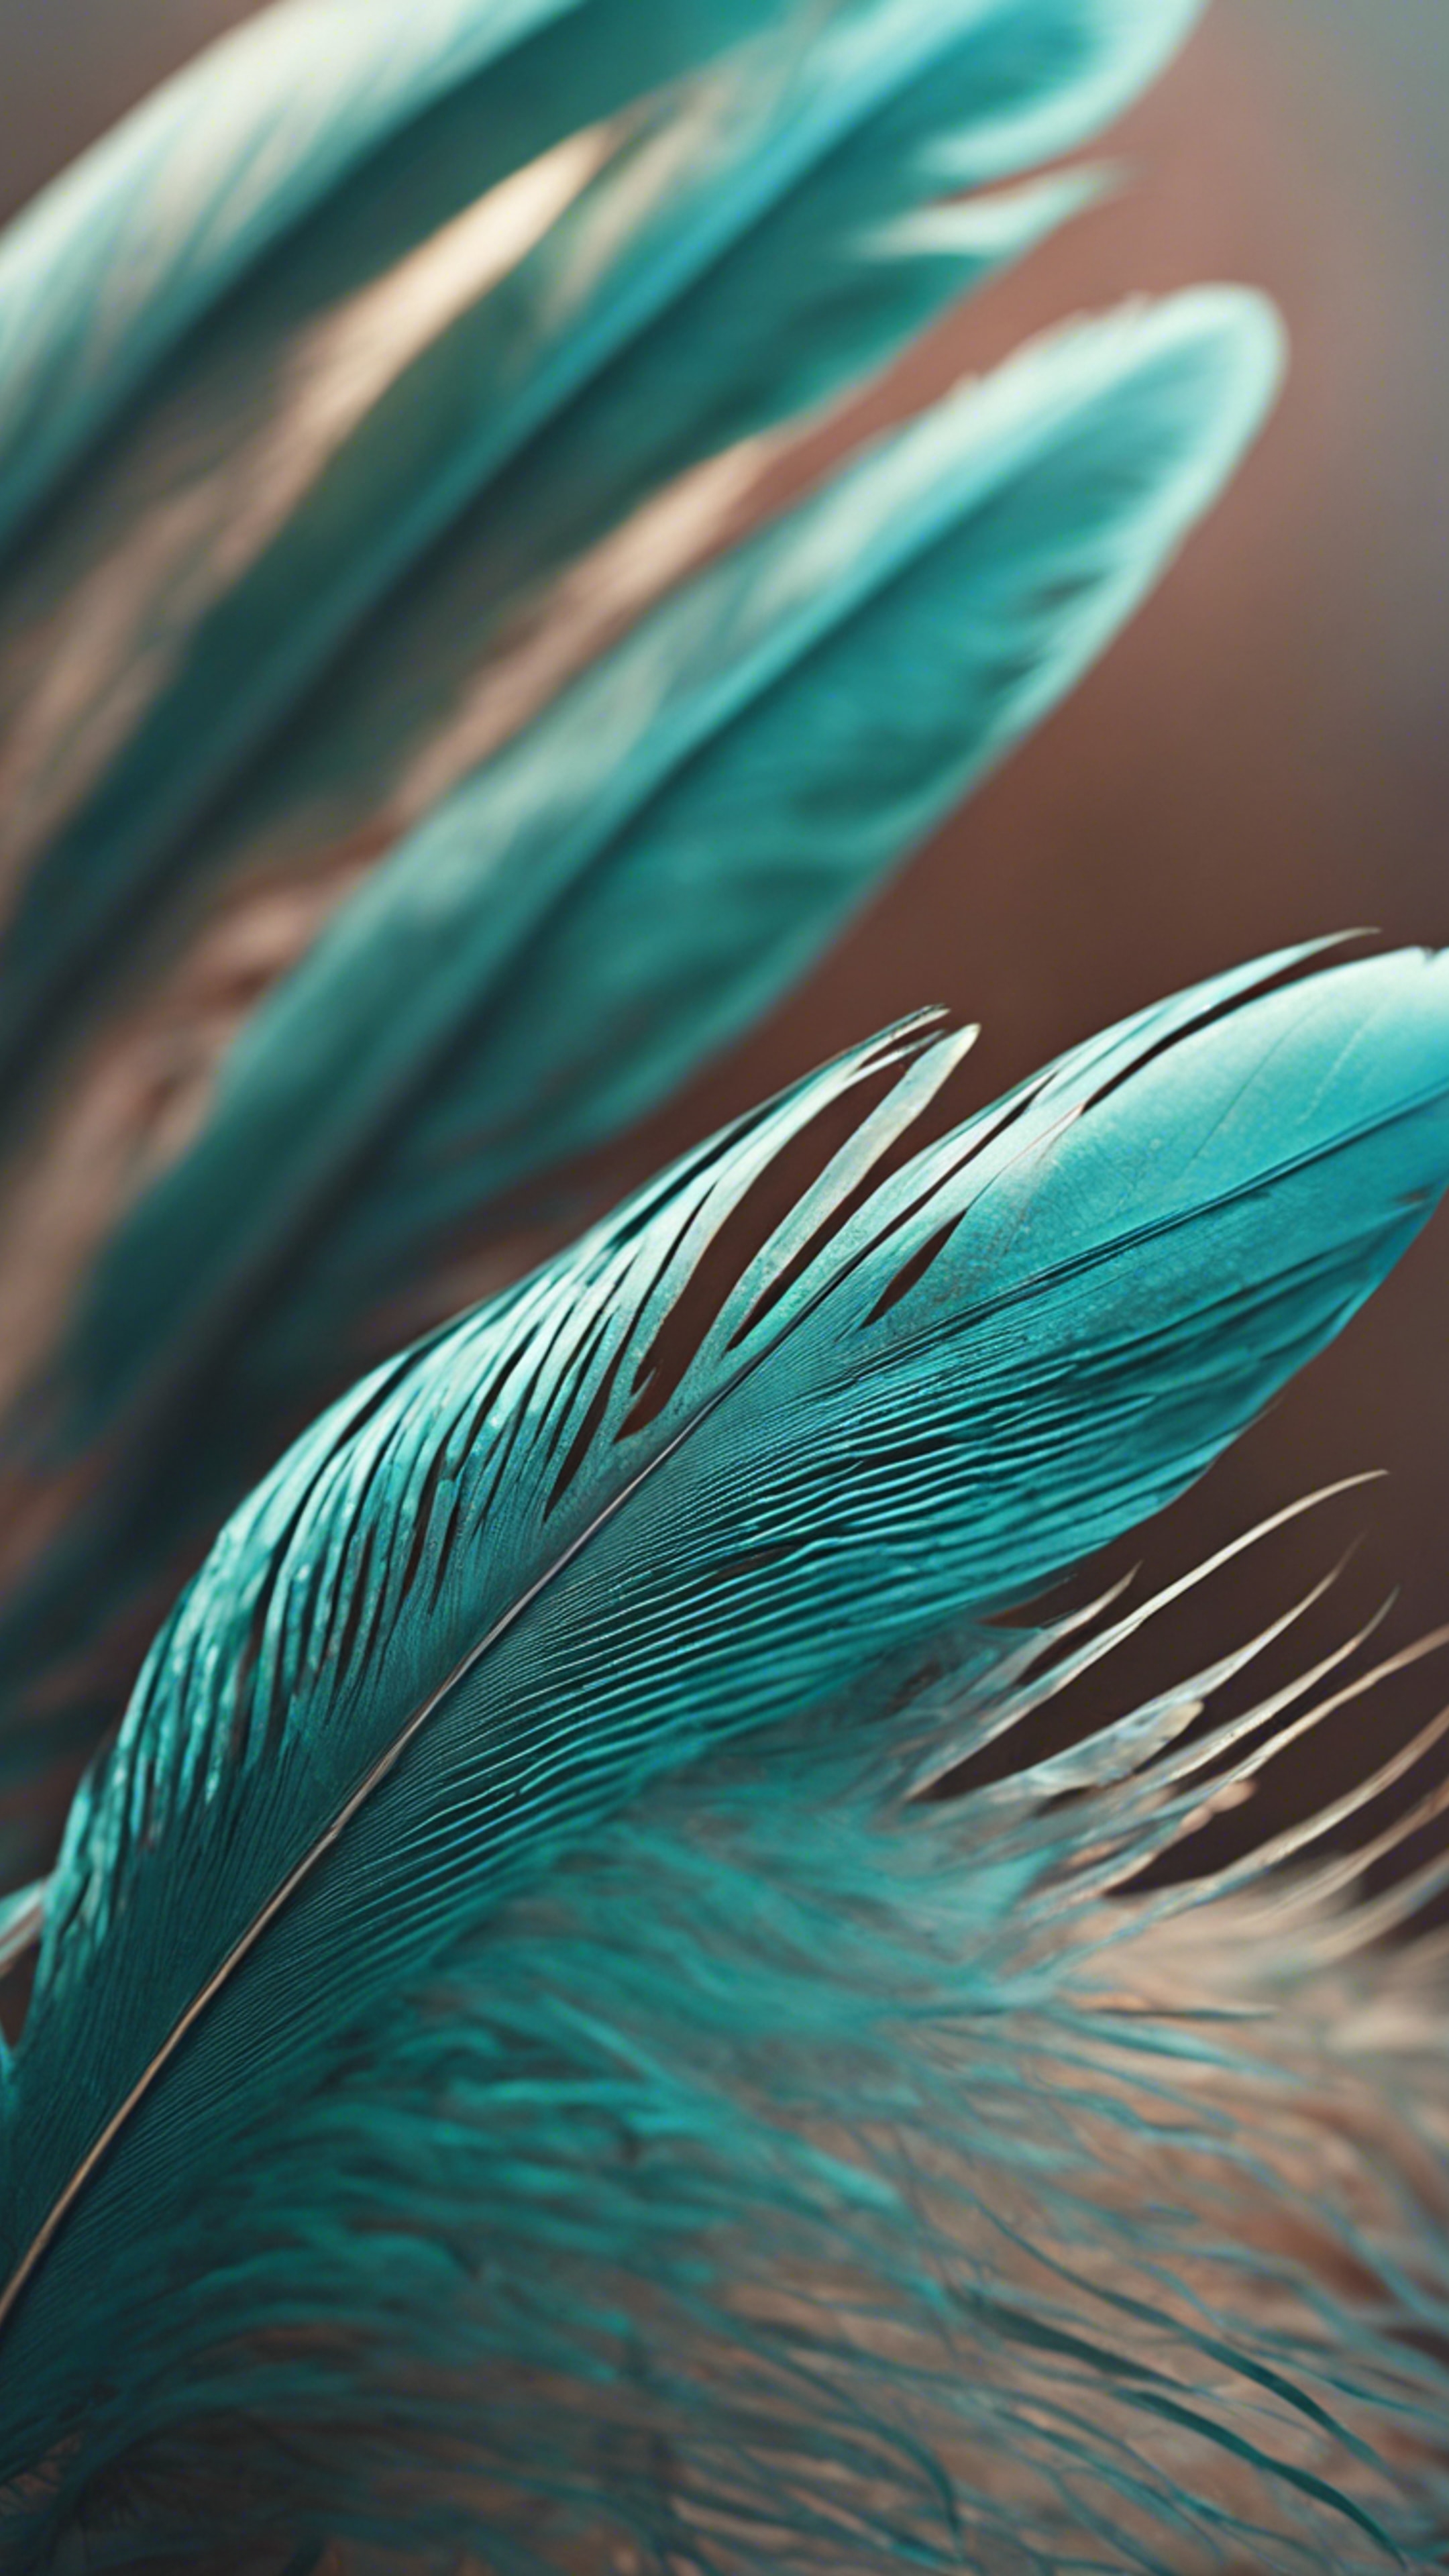 A close-up view of an exotic cool teal-colored birds' feather. טפט[44d0beeee9f542d4ae1e]